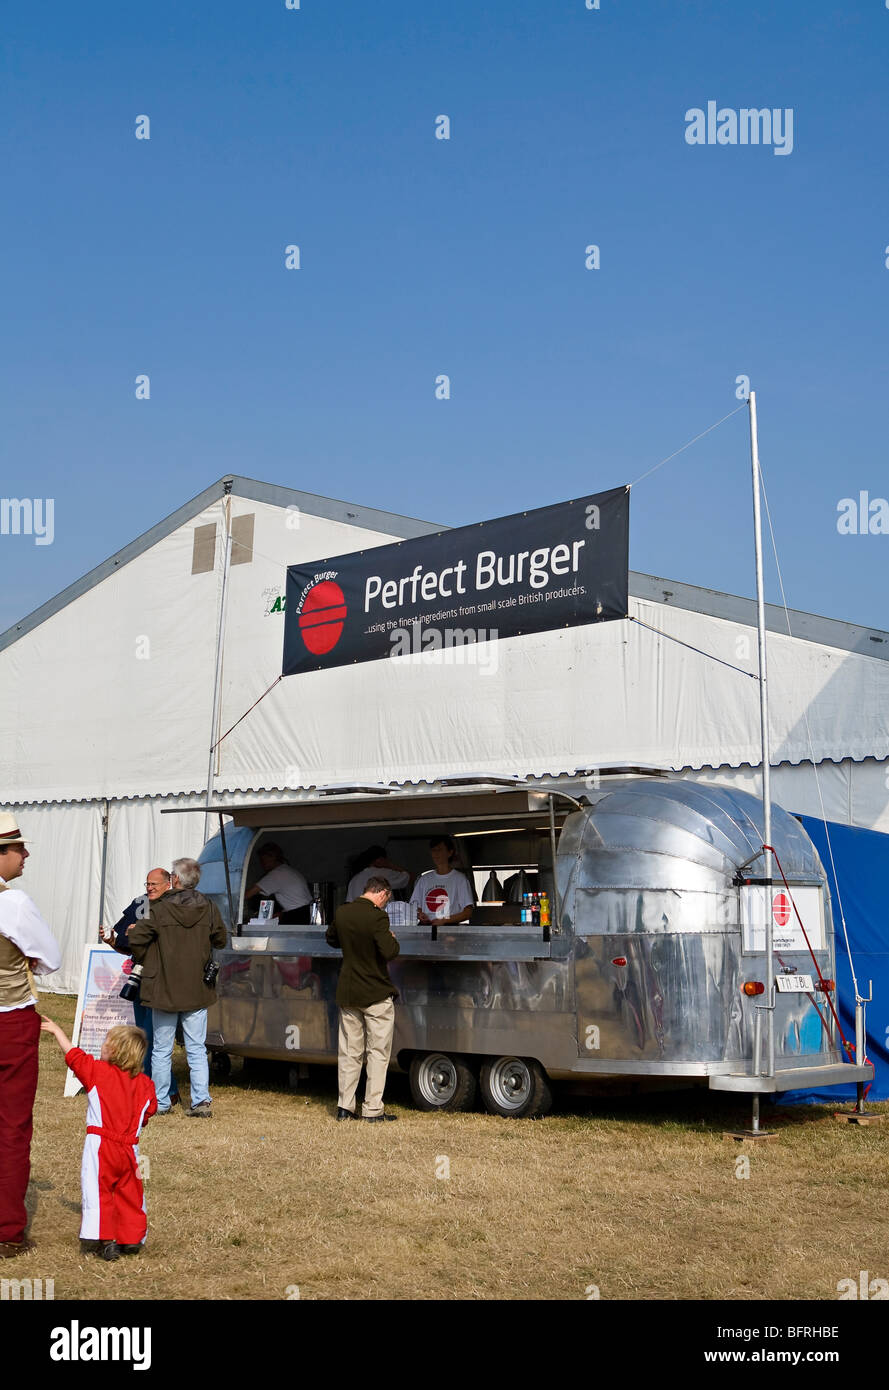 Silver retro Airstream burger van at Goodwood Revival, Chichester, West Sussex, UK Stock Photo